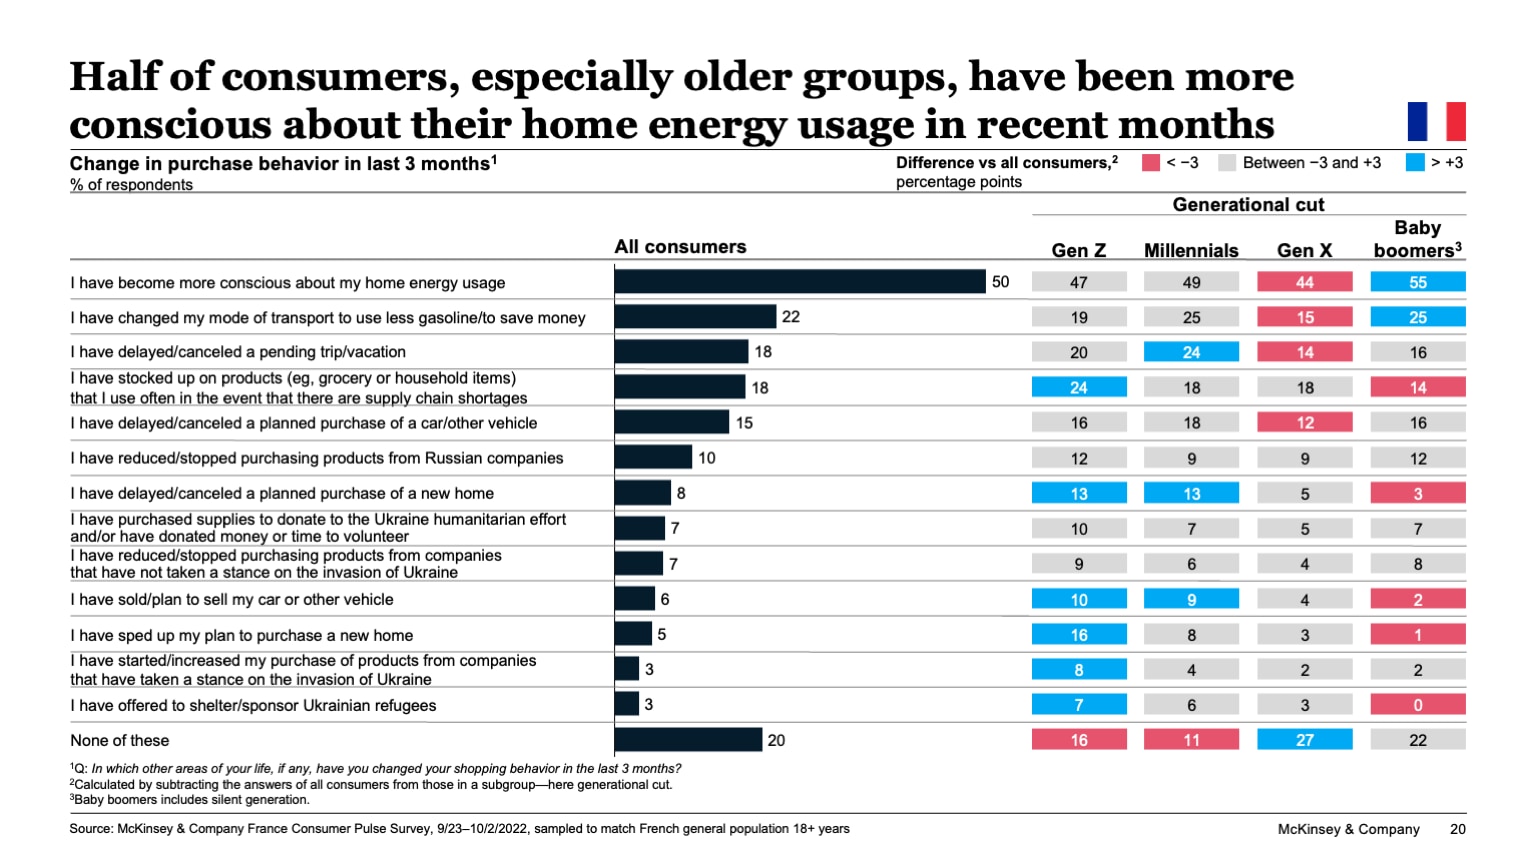 Half of consumers, especially older groups, have been more conscious about their home energy usage in recent months